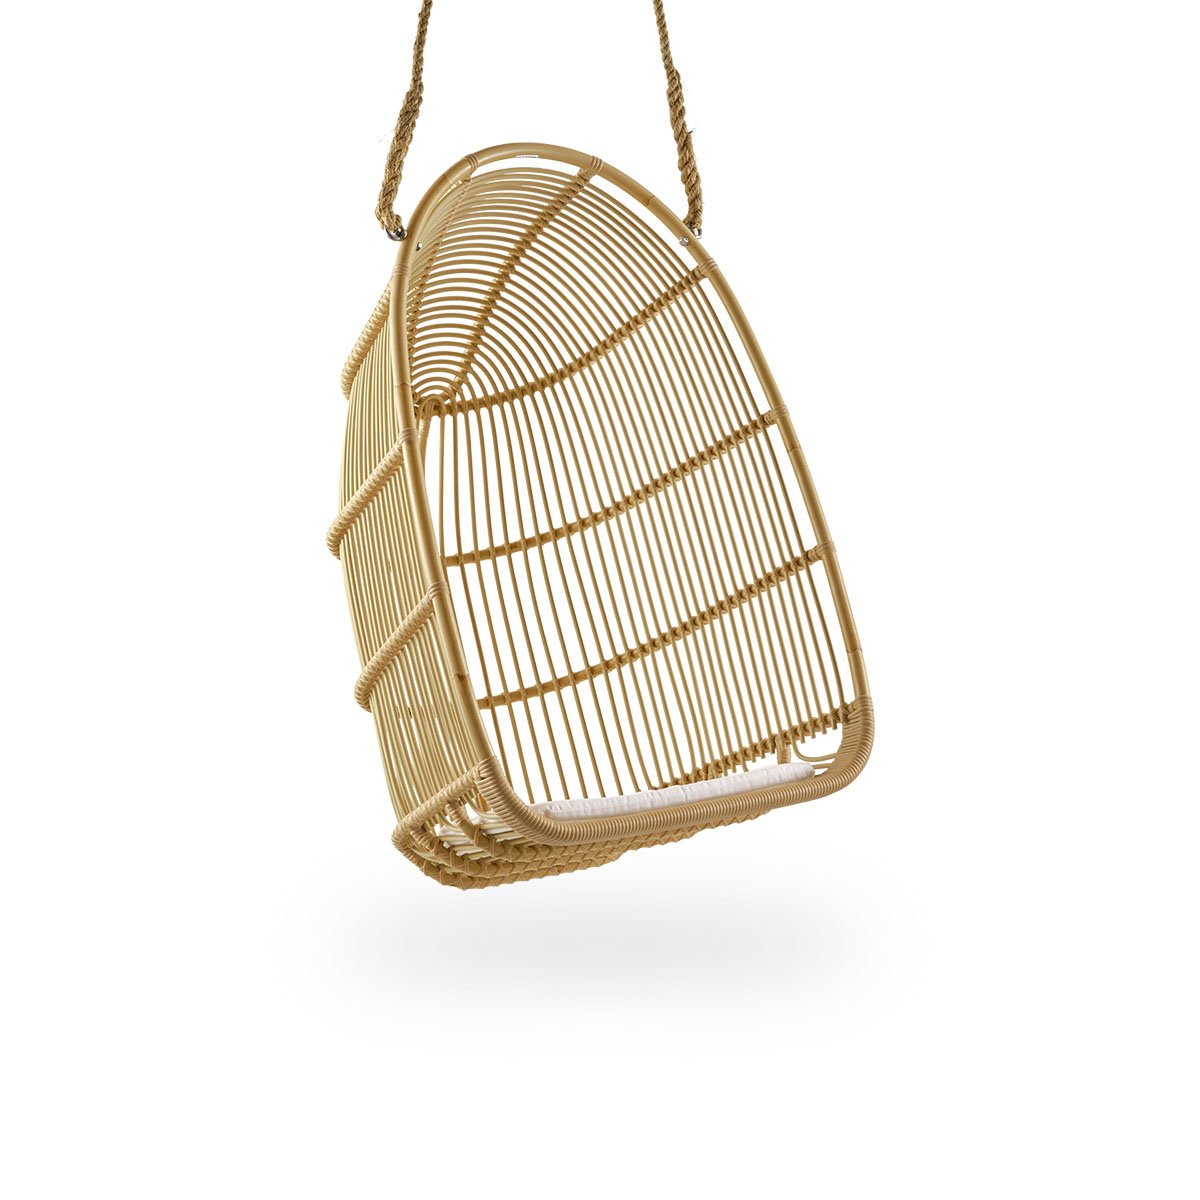 Renoir Exterior Hanging Chair by Sika